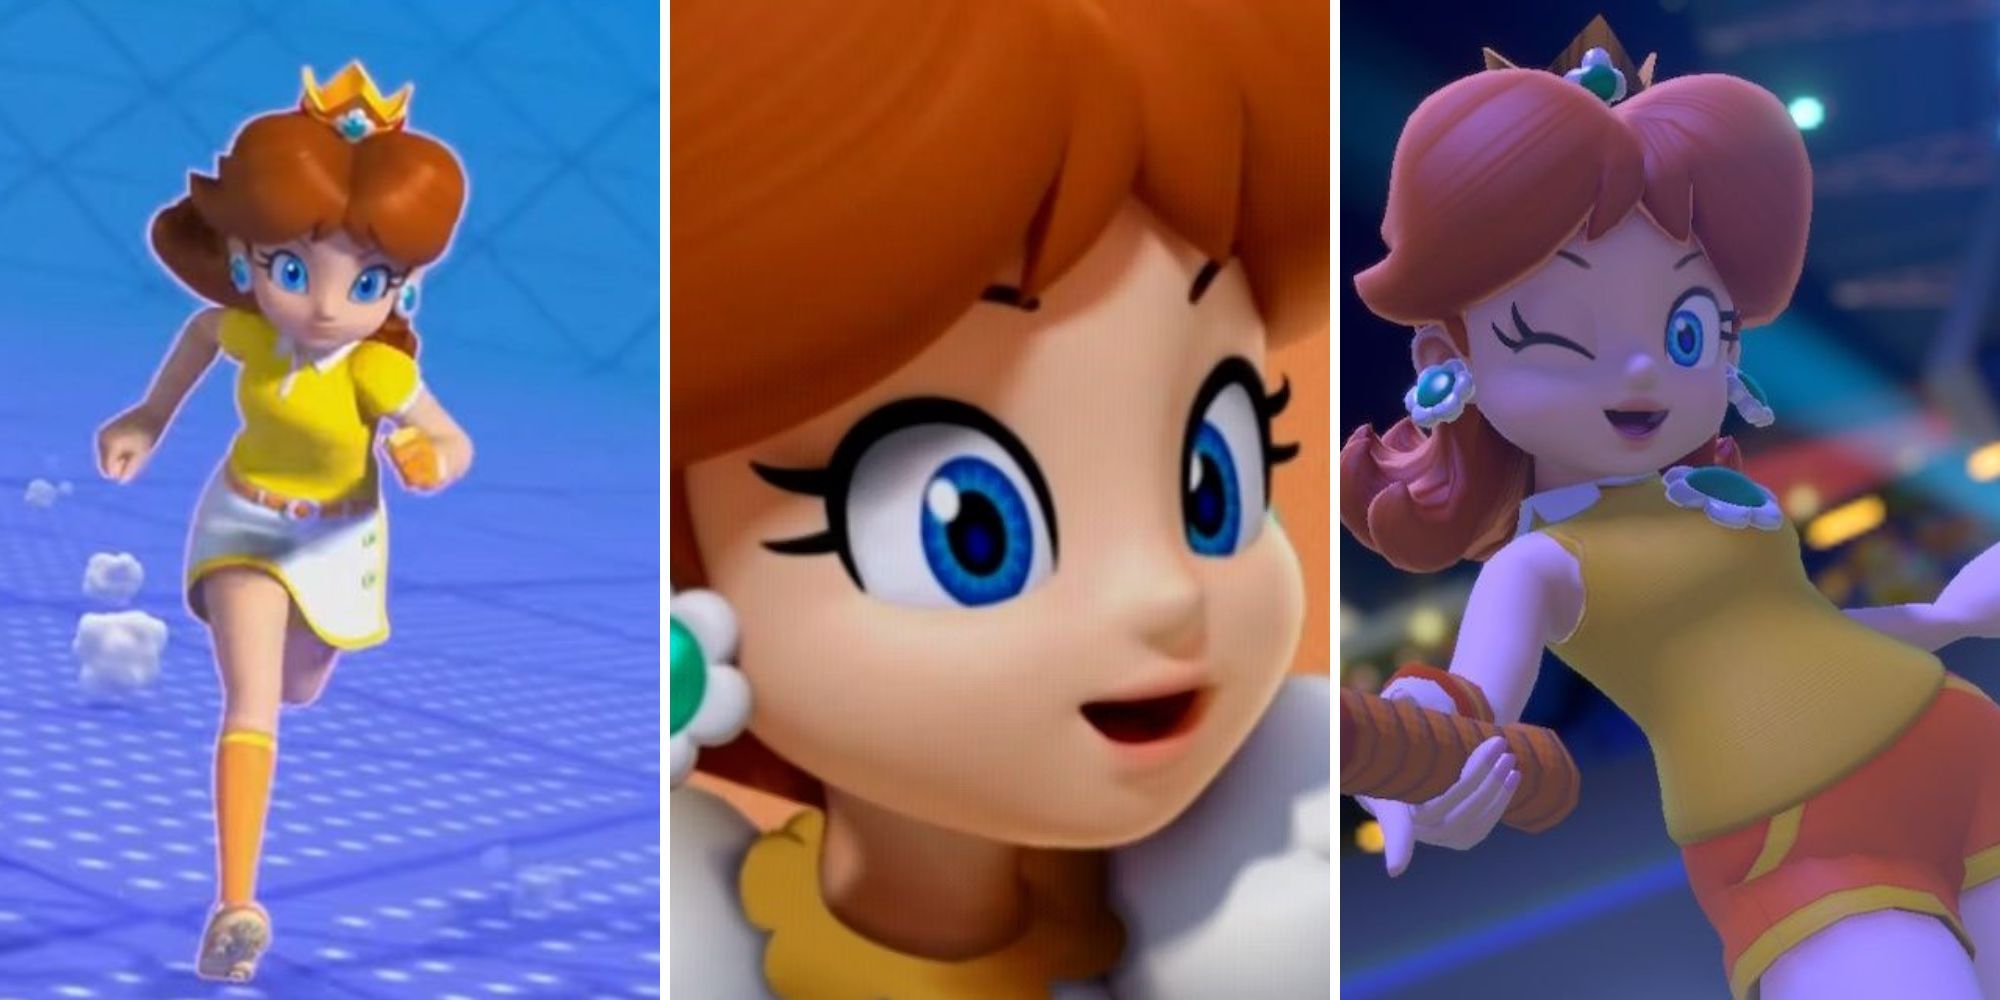 A grid showing Princess Daisy in three different Mario games